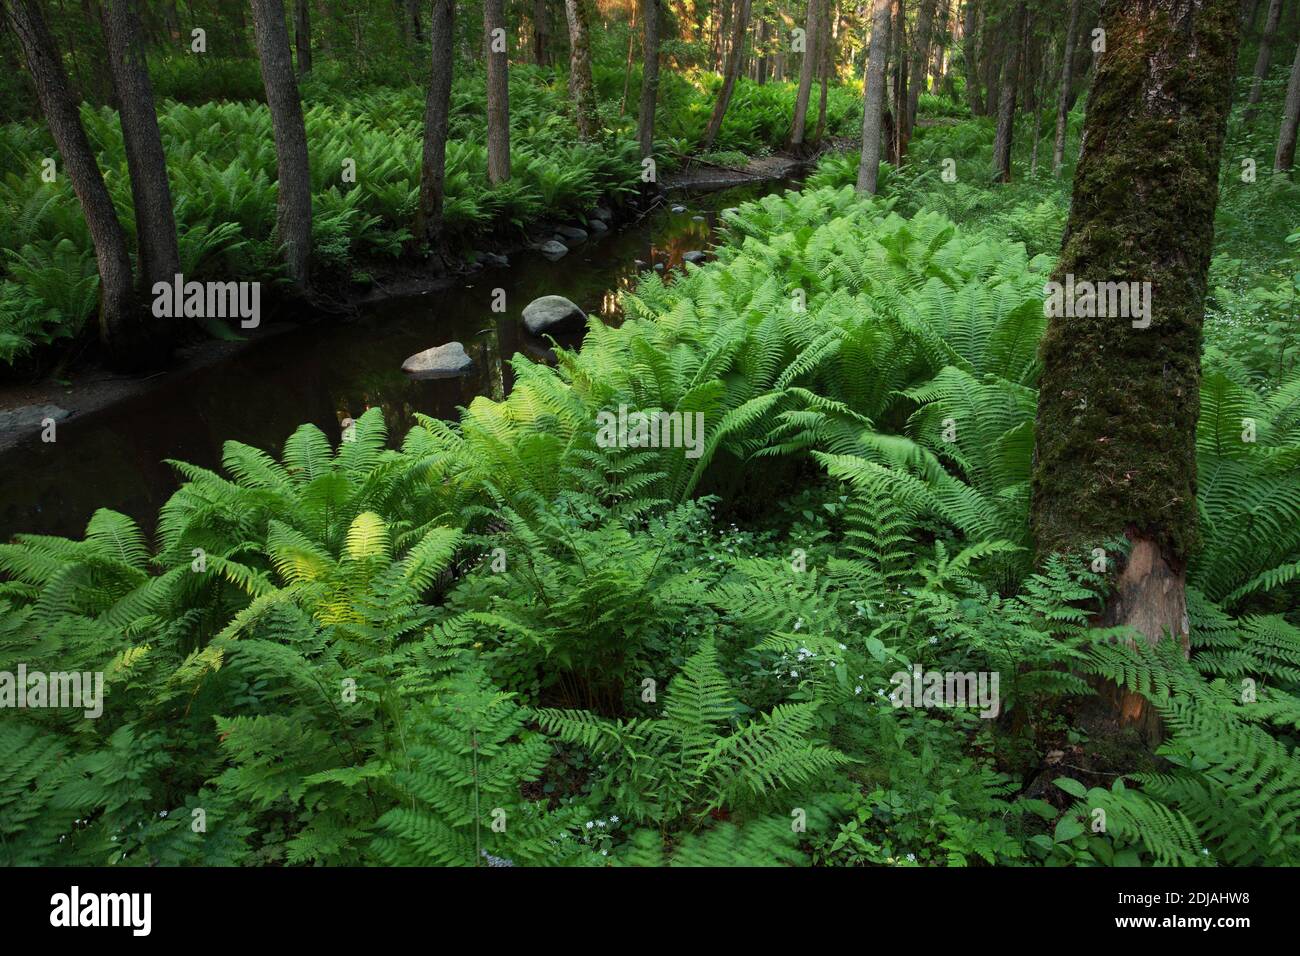 A lush old-growth forest by a small stream with large and green ferns. Shot in Lahemaa National park, Estonia. Stock Photo